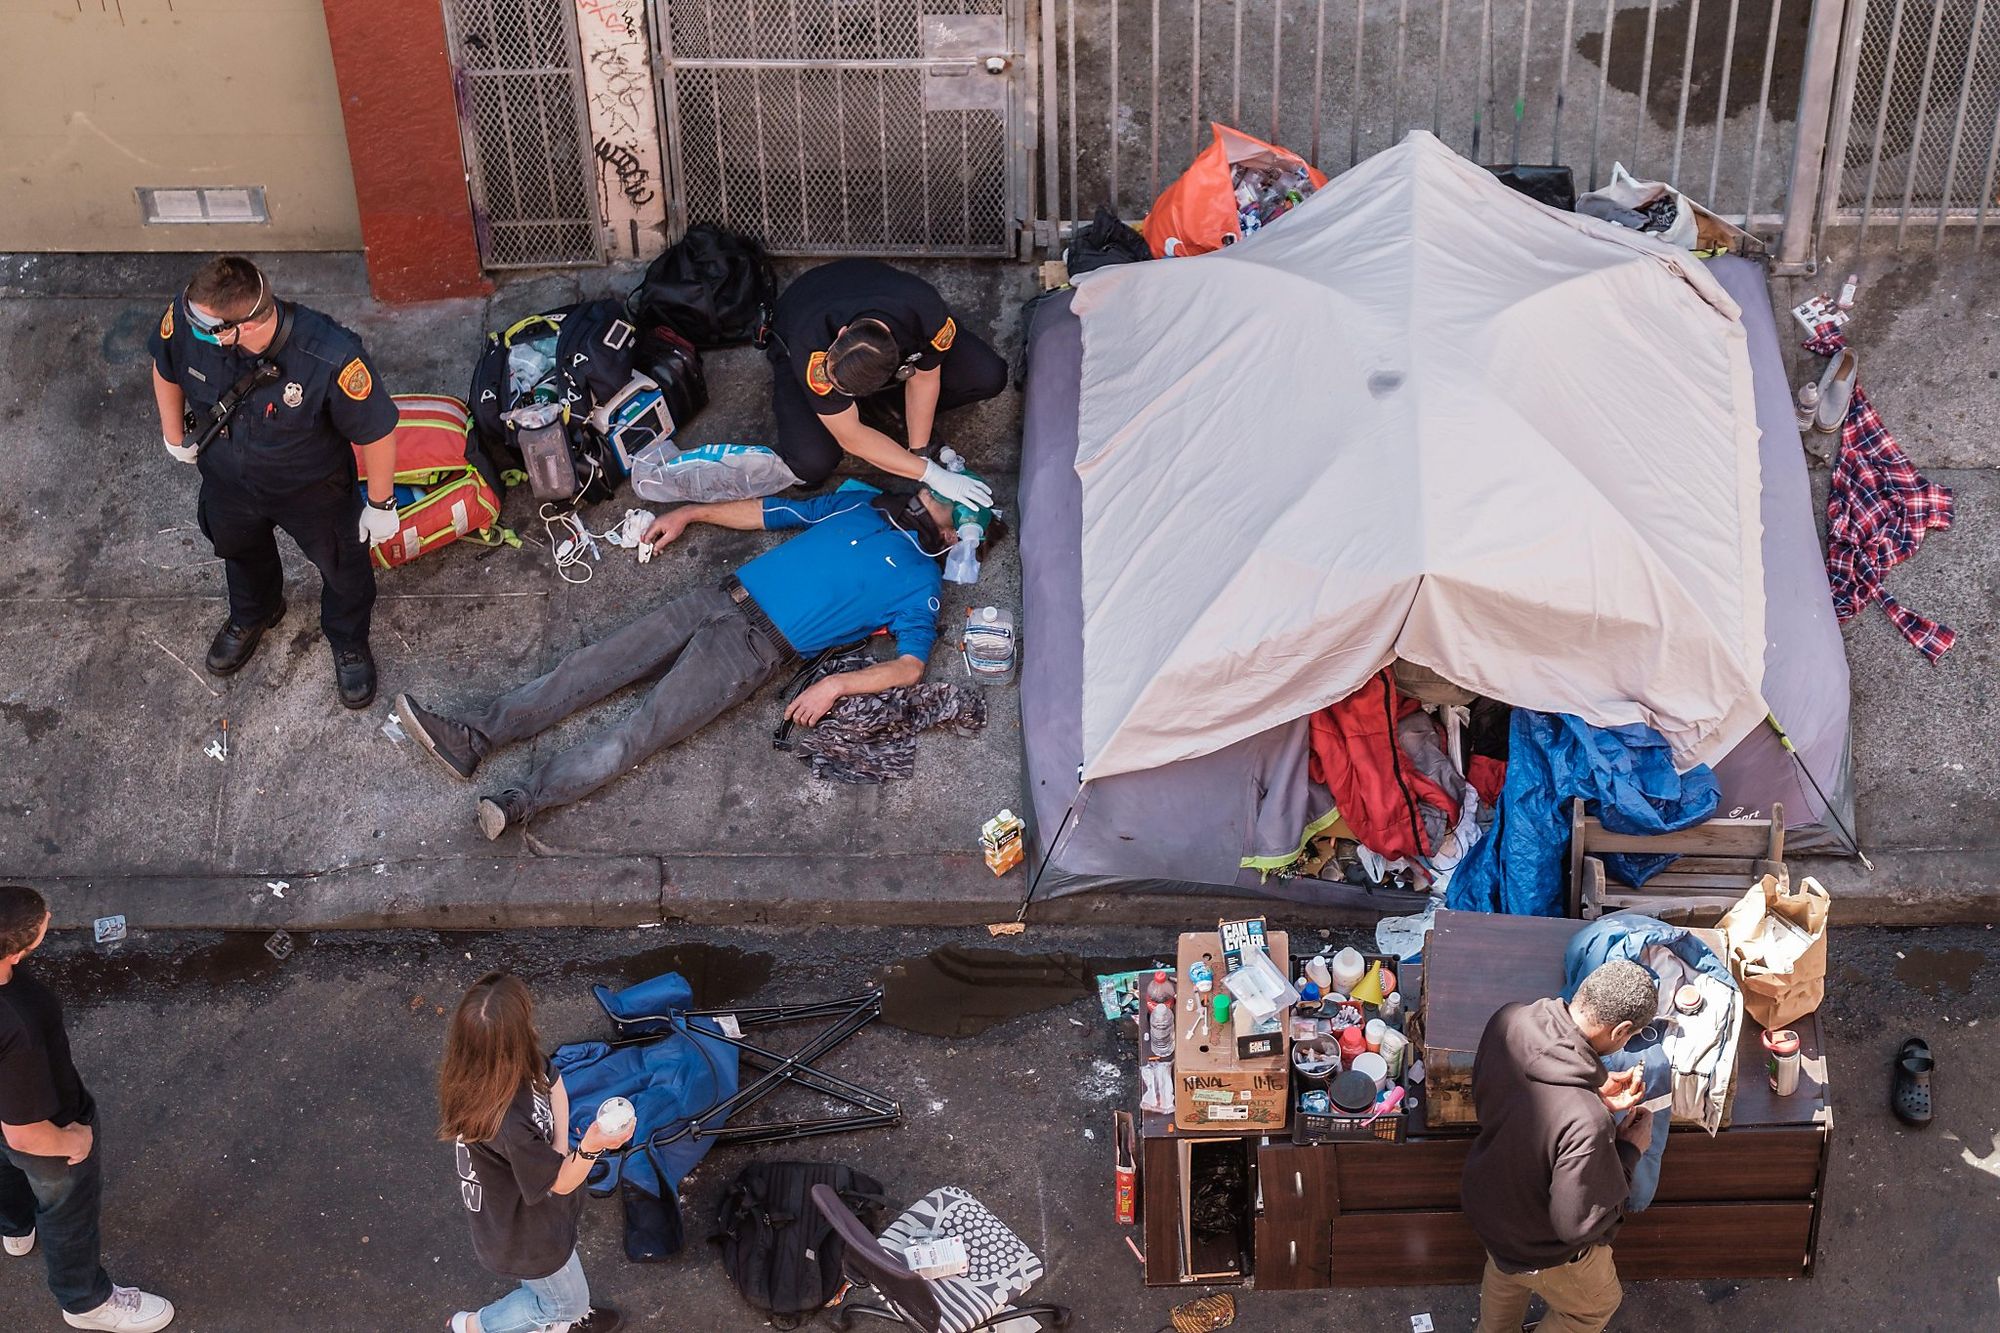 Why San Francisco needs an Austin-style Public Camping Ban